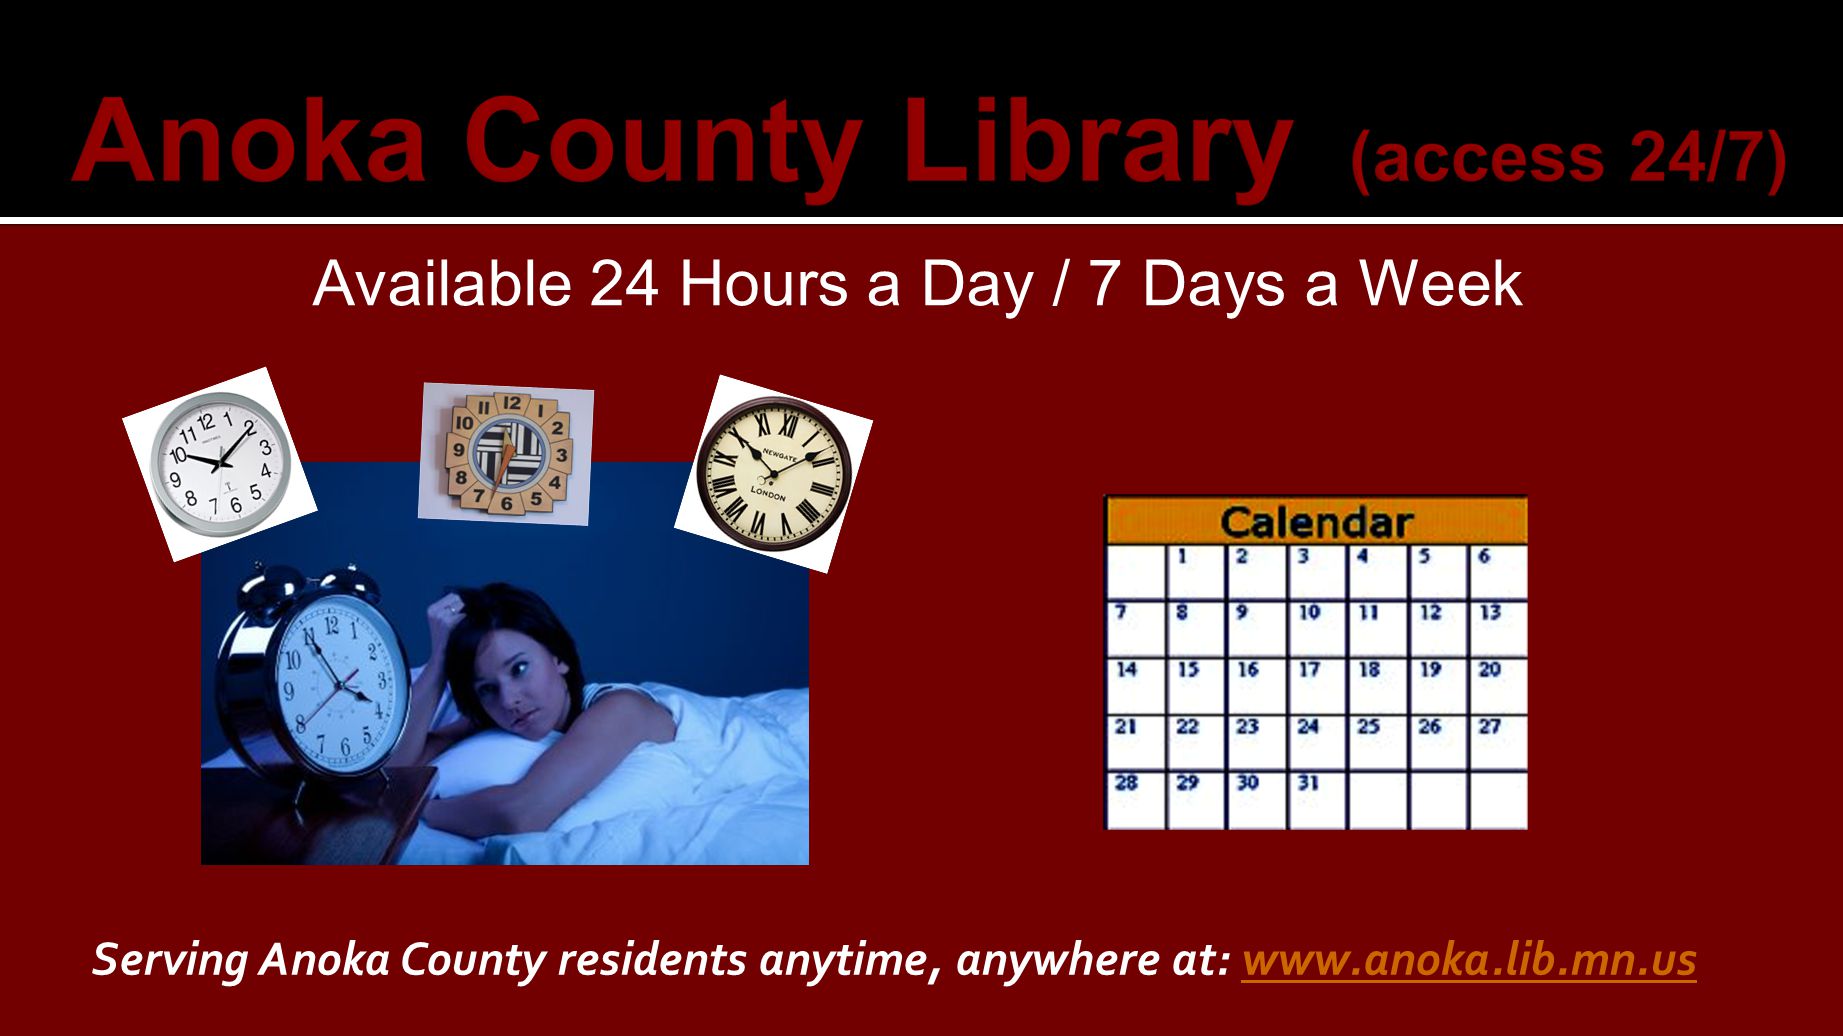 Available 24 Hours a Day / 7 Days a Week Serving Anoka County residents anytime, anywhere at: